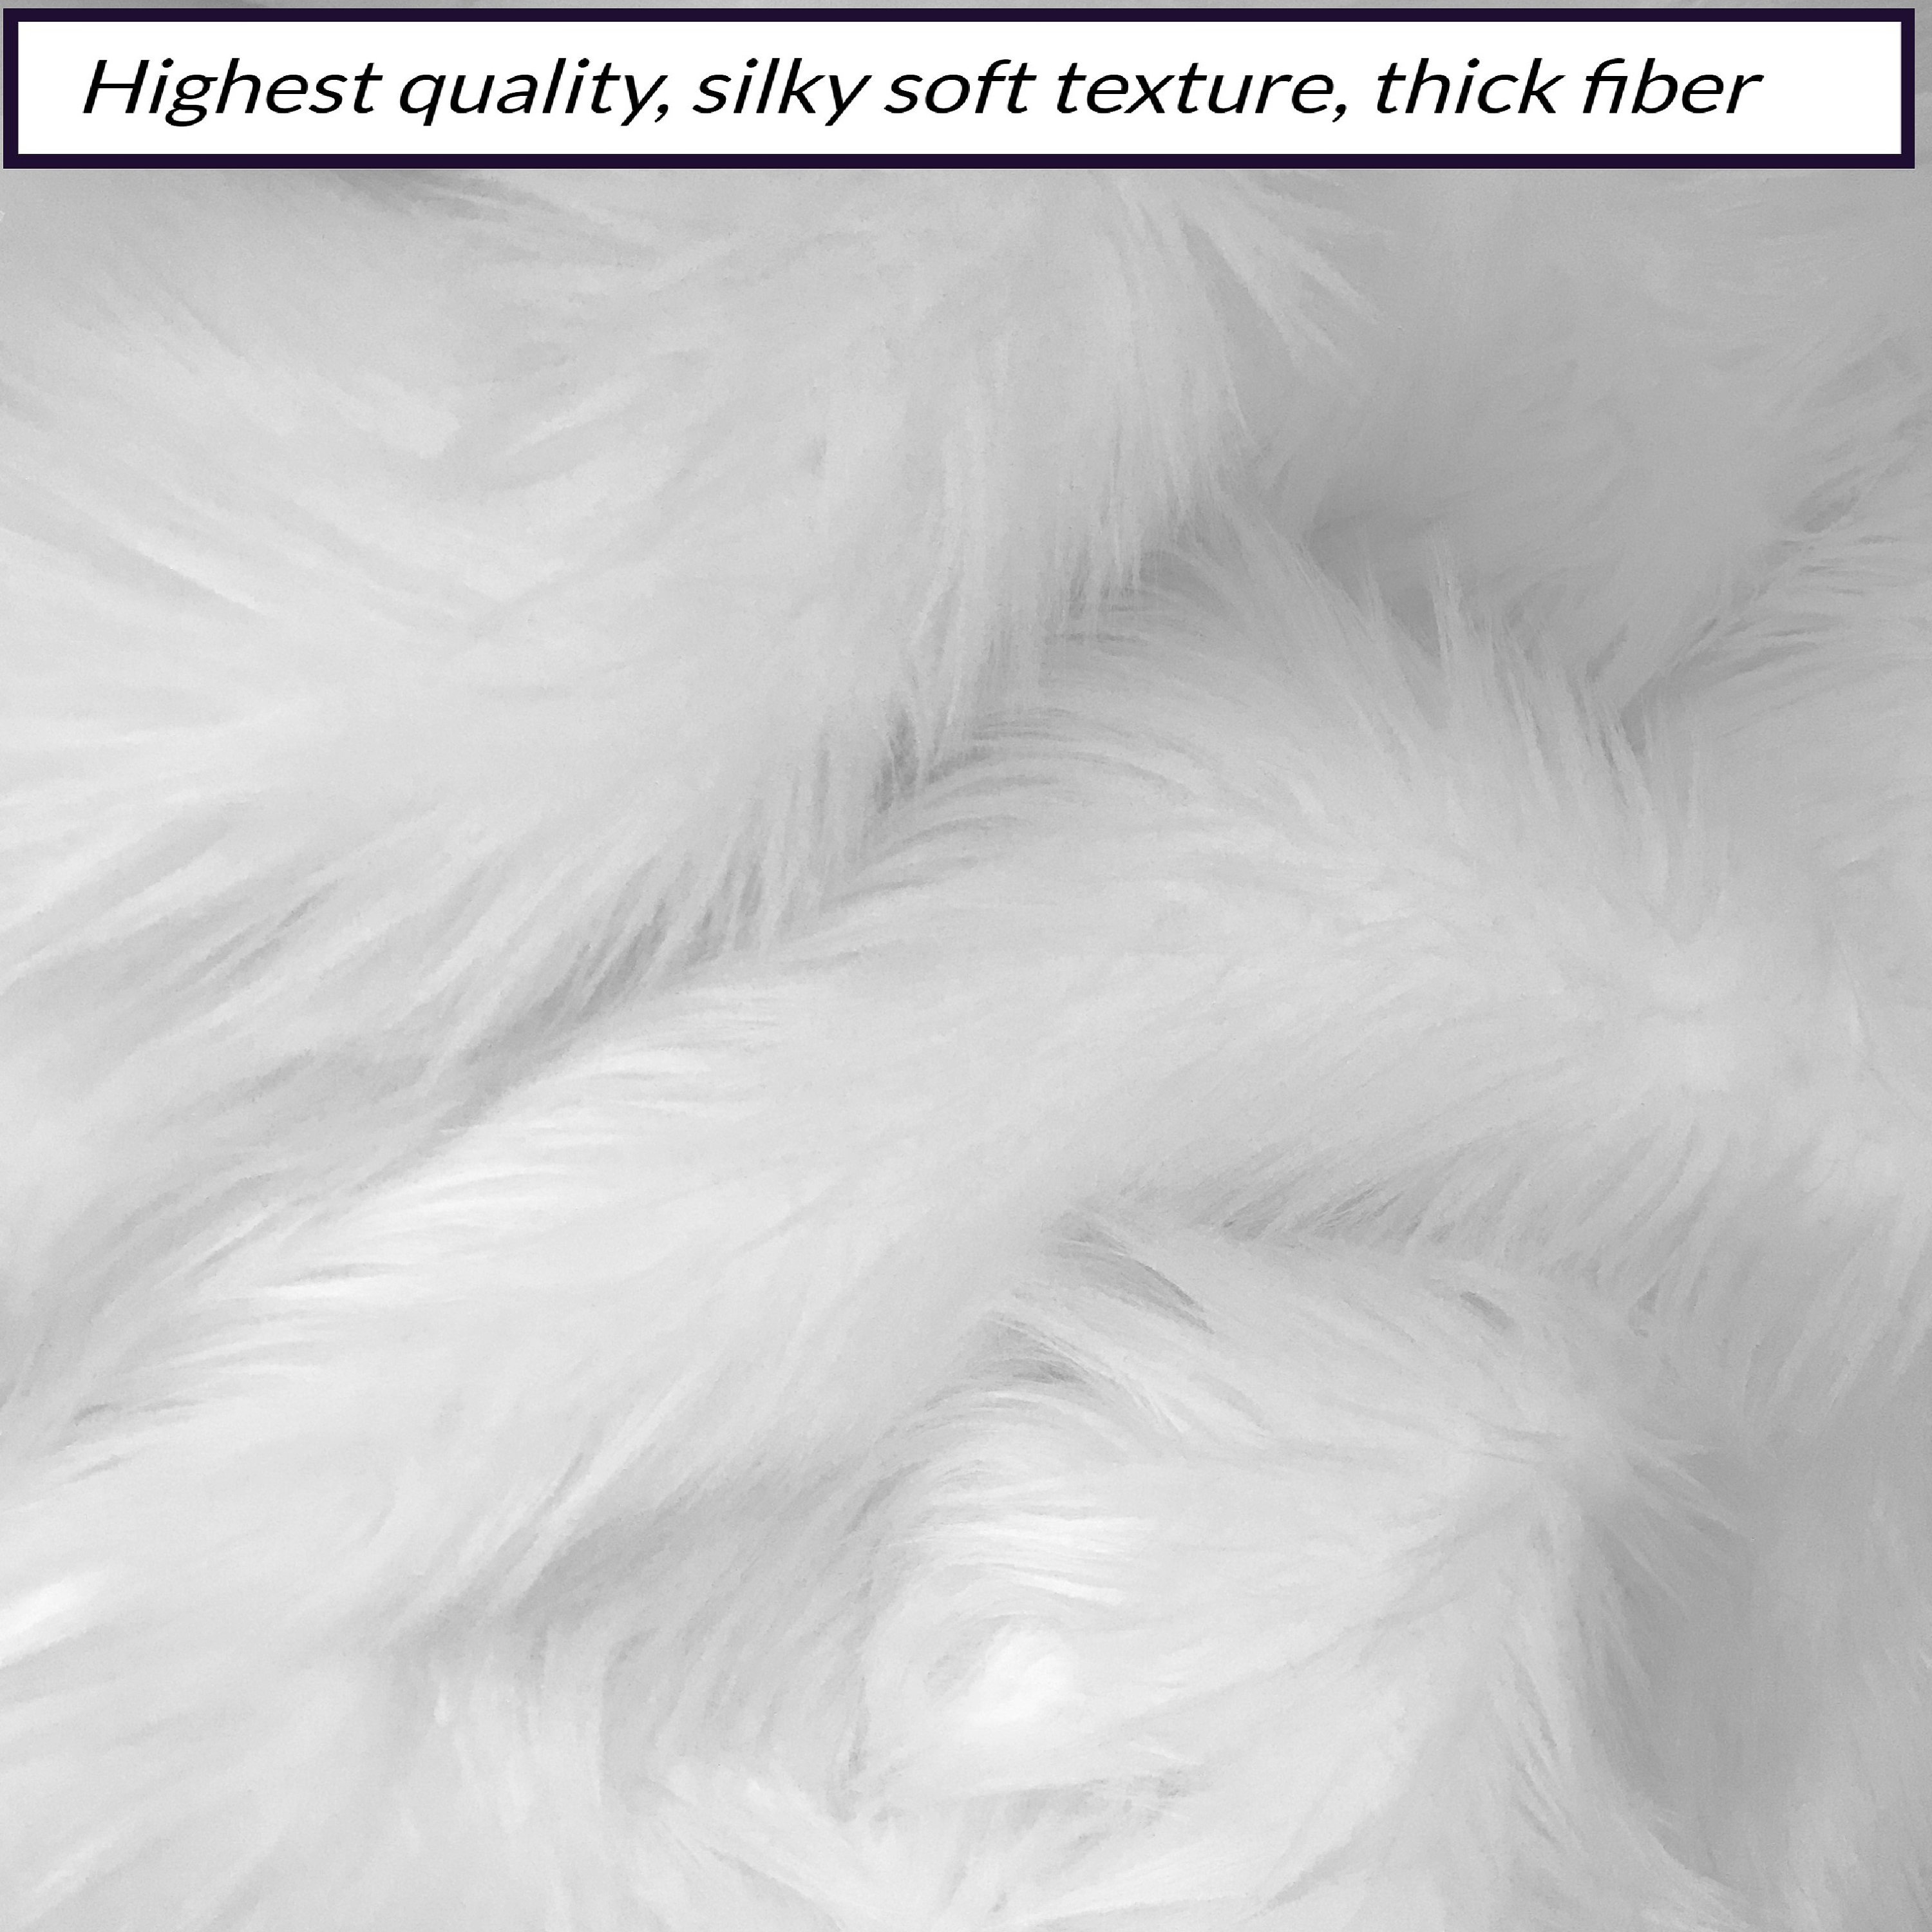 Faux Fur Fabric Ultra Soft Deluxe Plush Shaggy Squares Craft Bianna Creations Royal Blue, 8x8 inches Props Decoration Costumes Sewing 